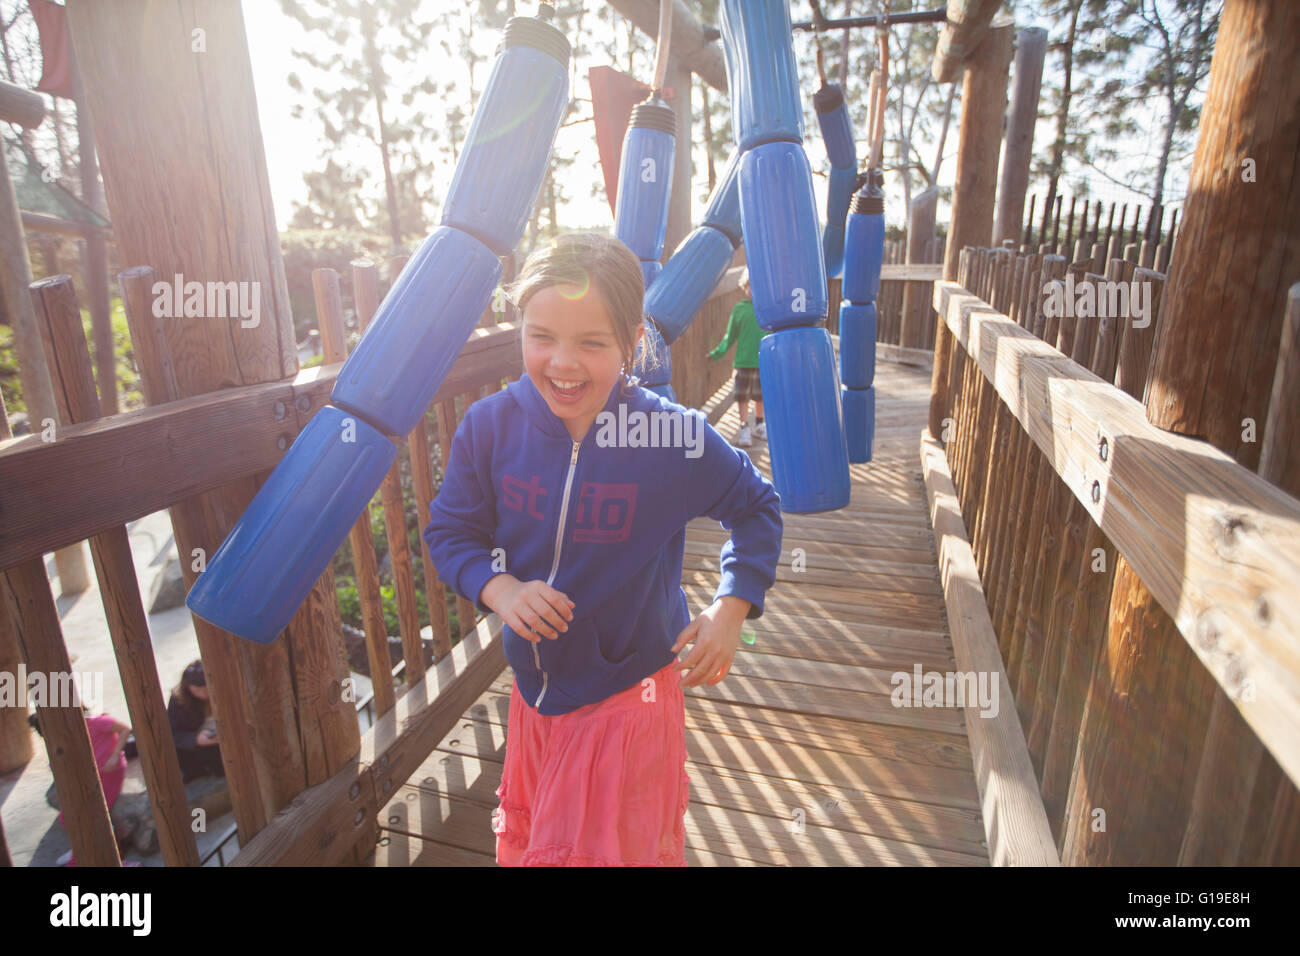 A young girl playing at an amusement park. Stock Photo